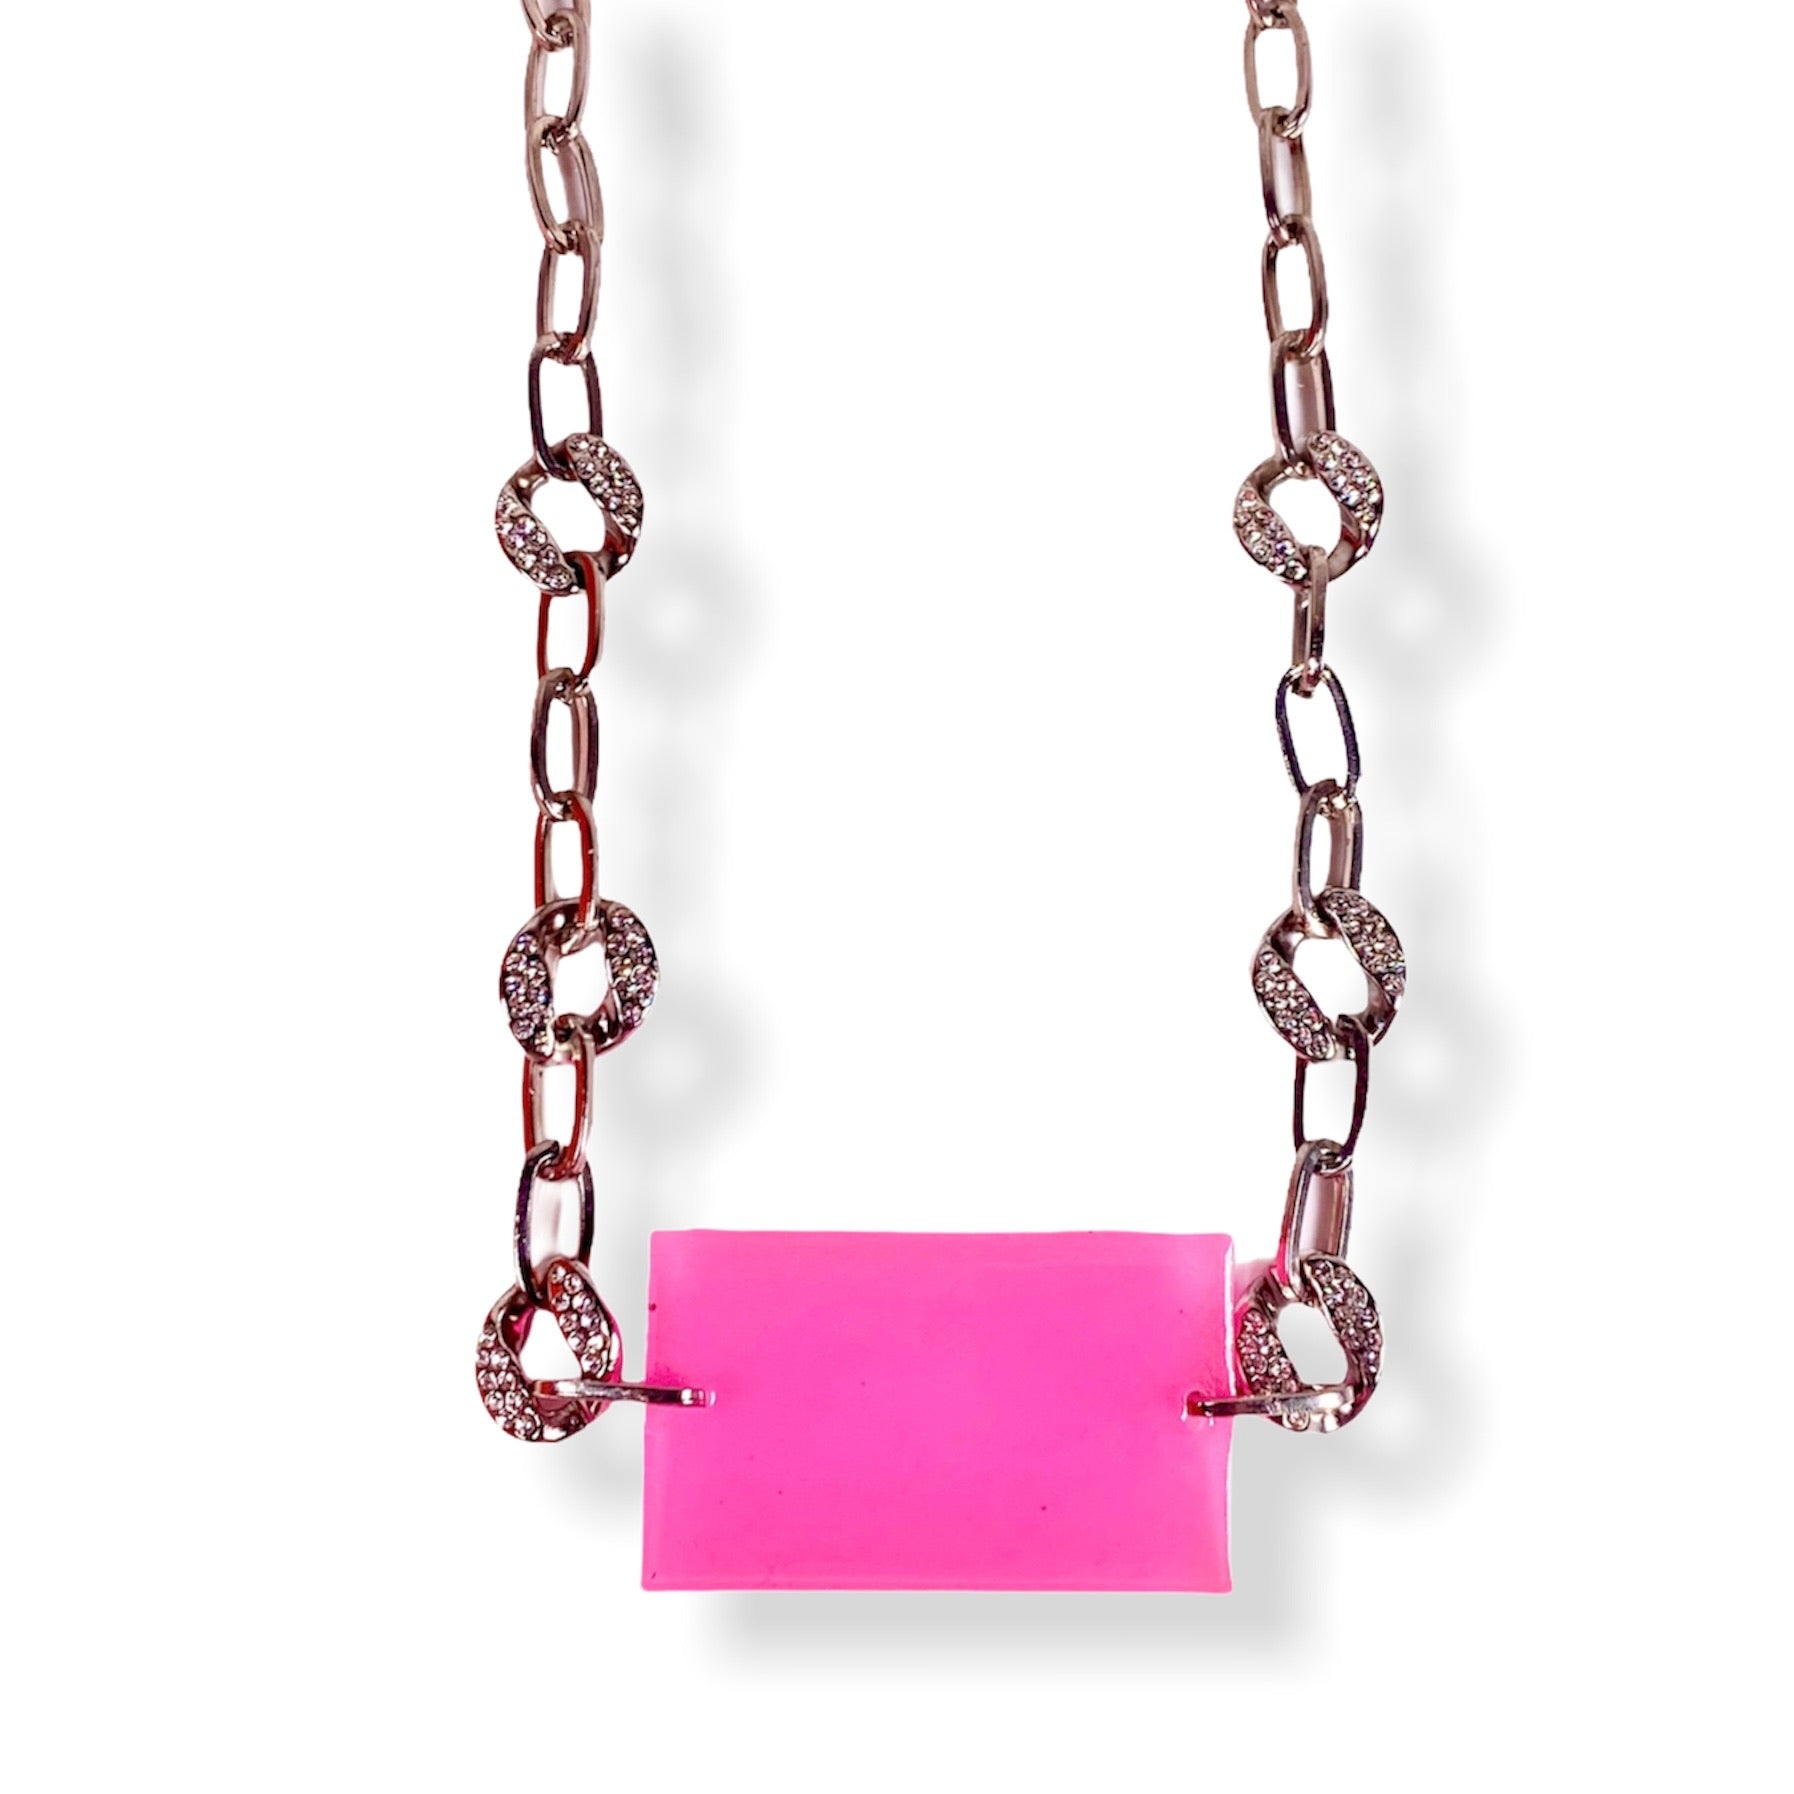 Candy pink necklace